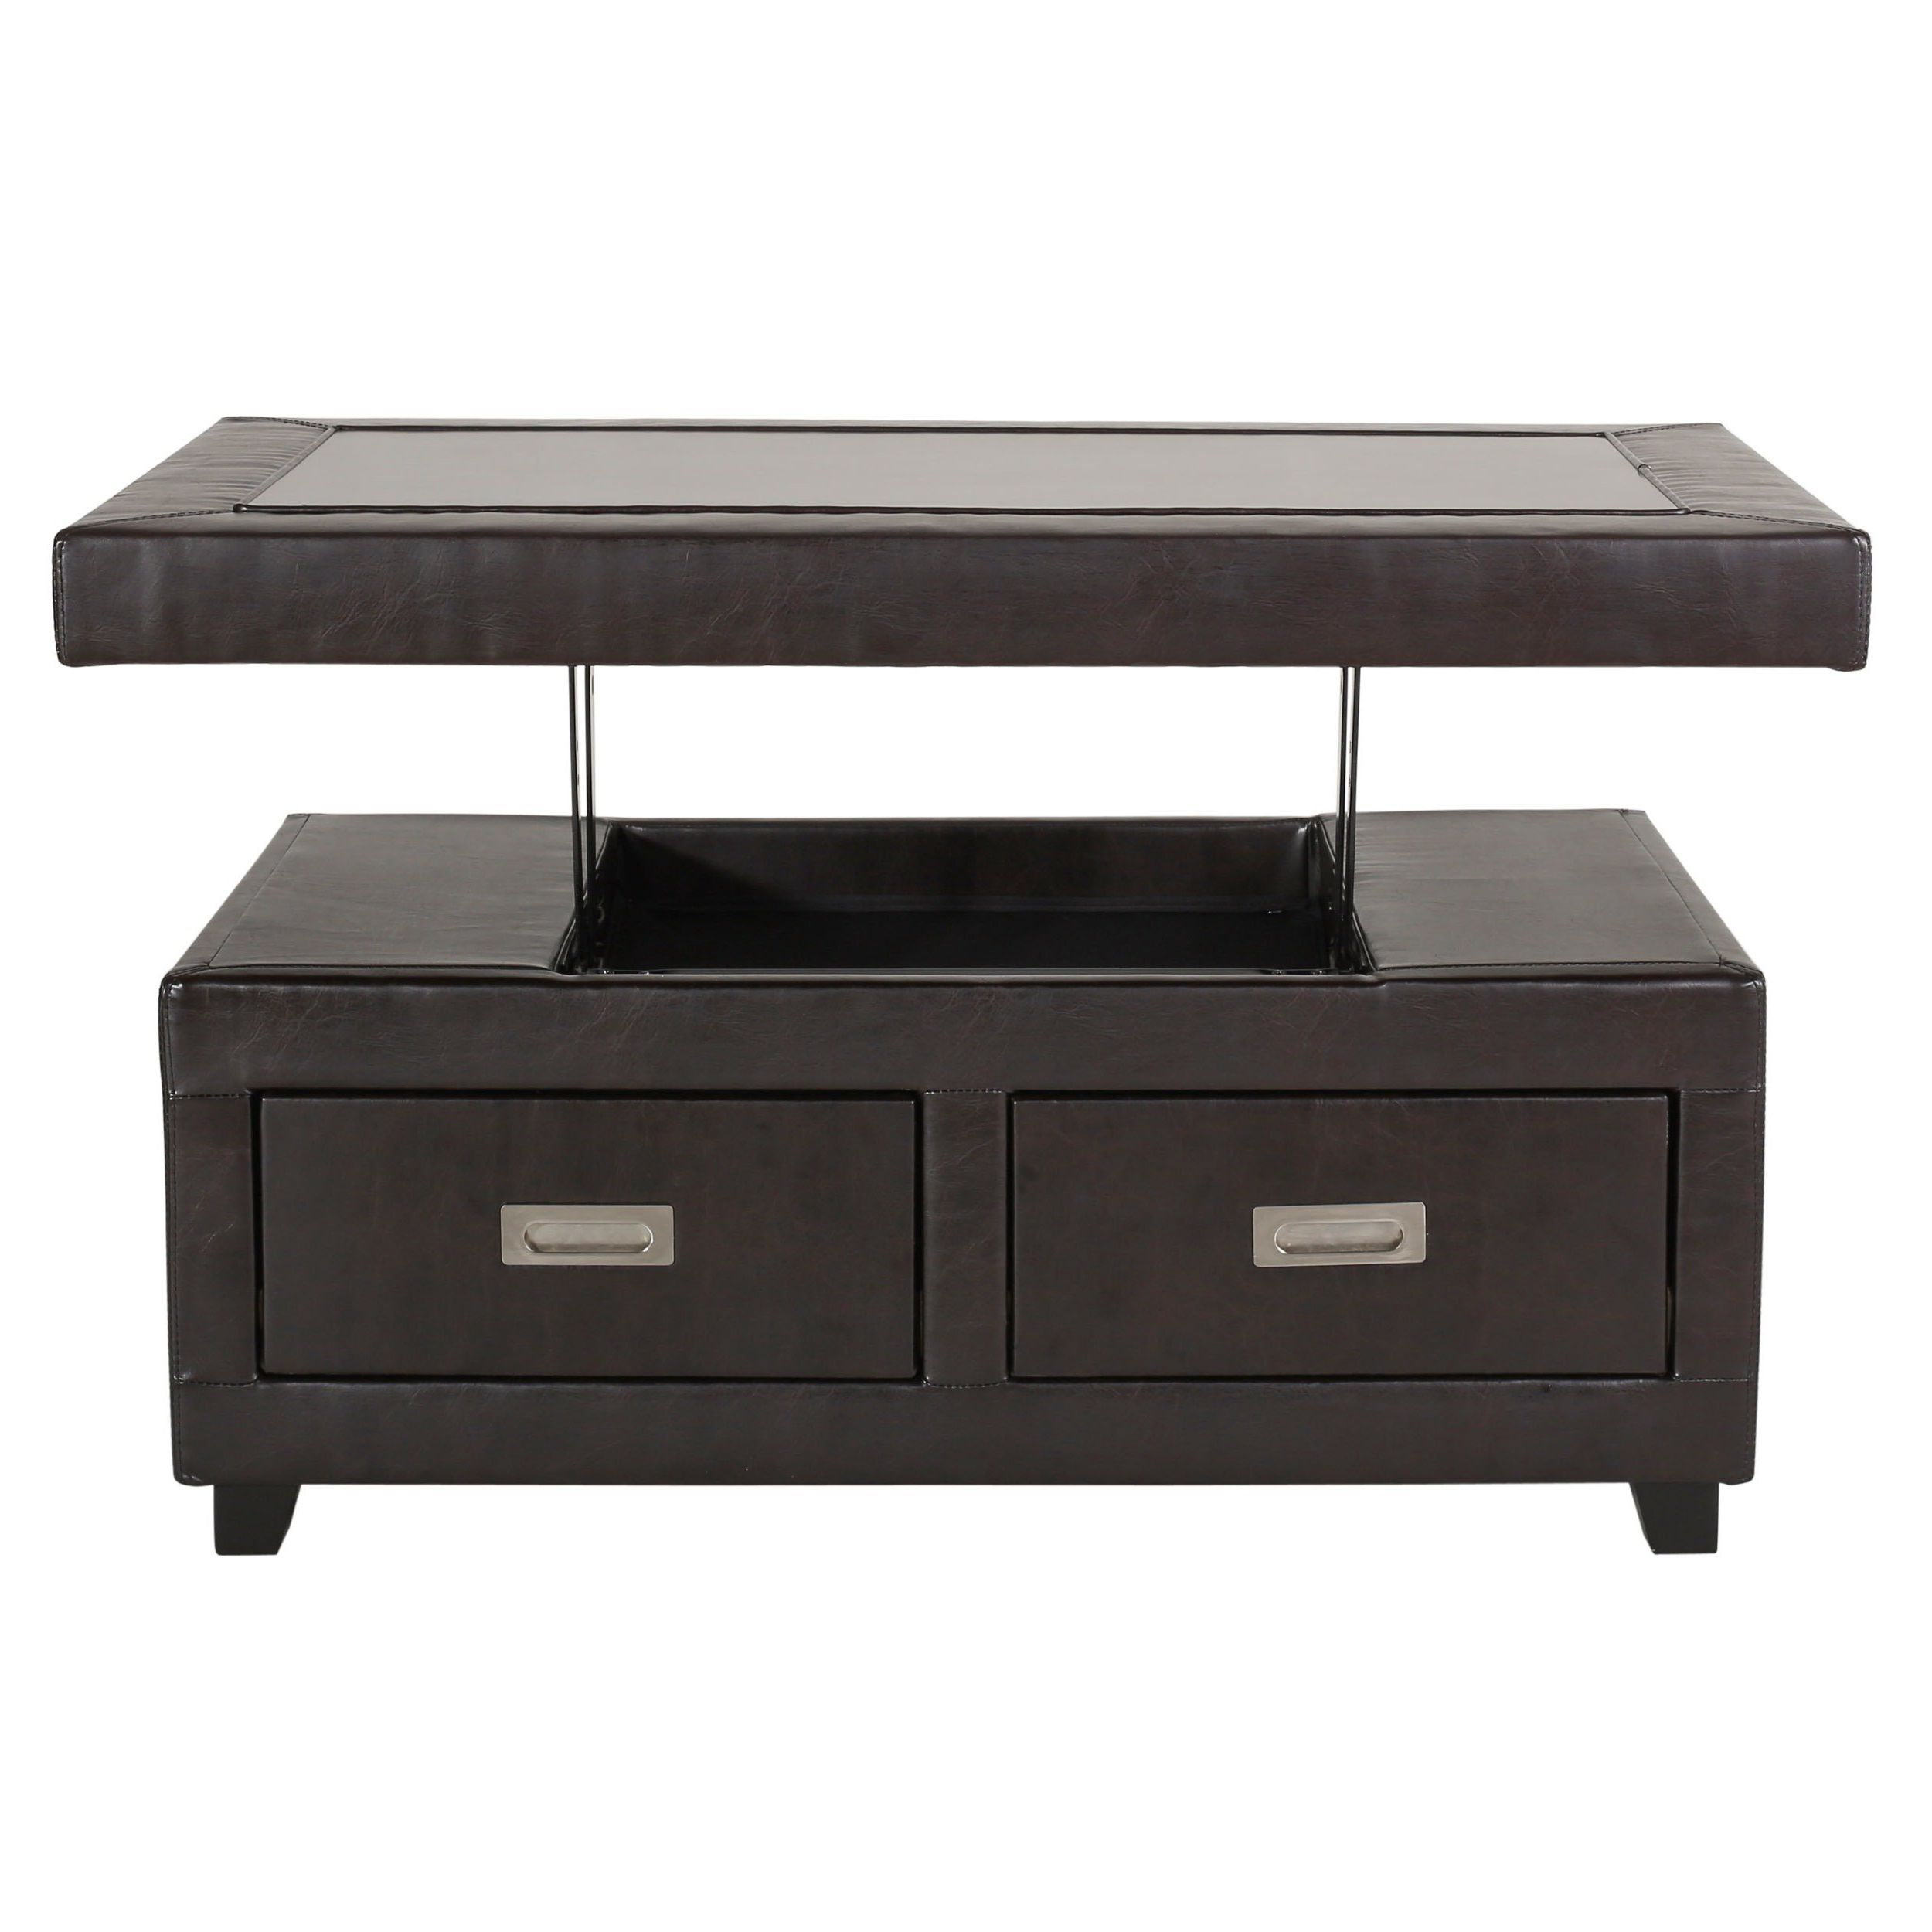 Shop Stafford Bonded Leather Adjustable Lift Top Table With Regard To Latest Grant Lift Top Cocktail Tables With Casters (View 11 of 20)